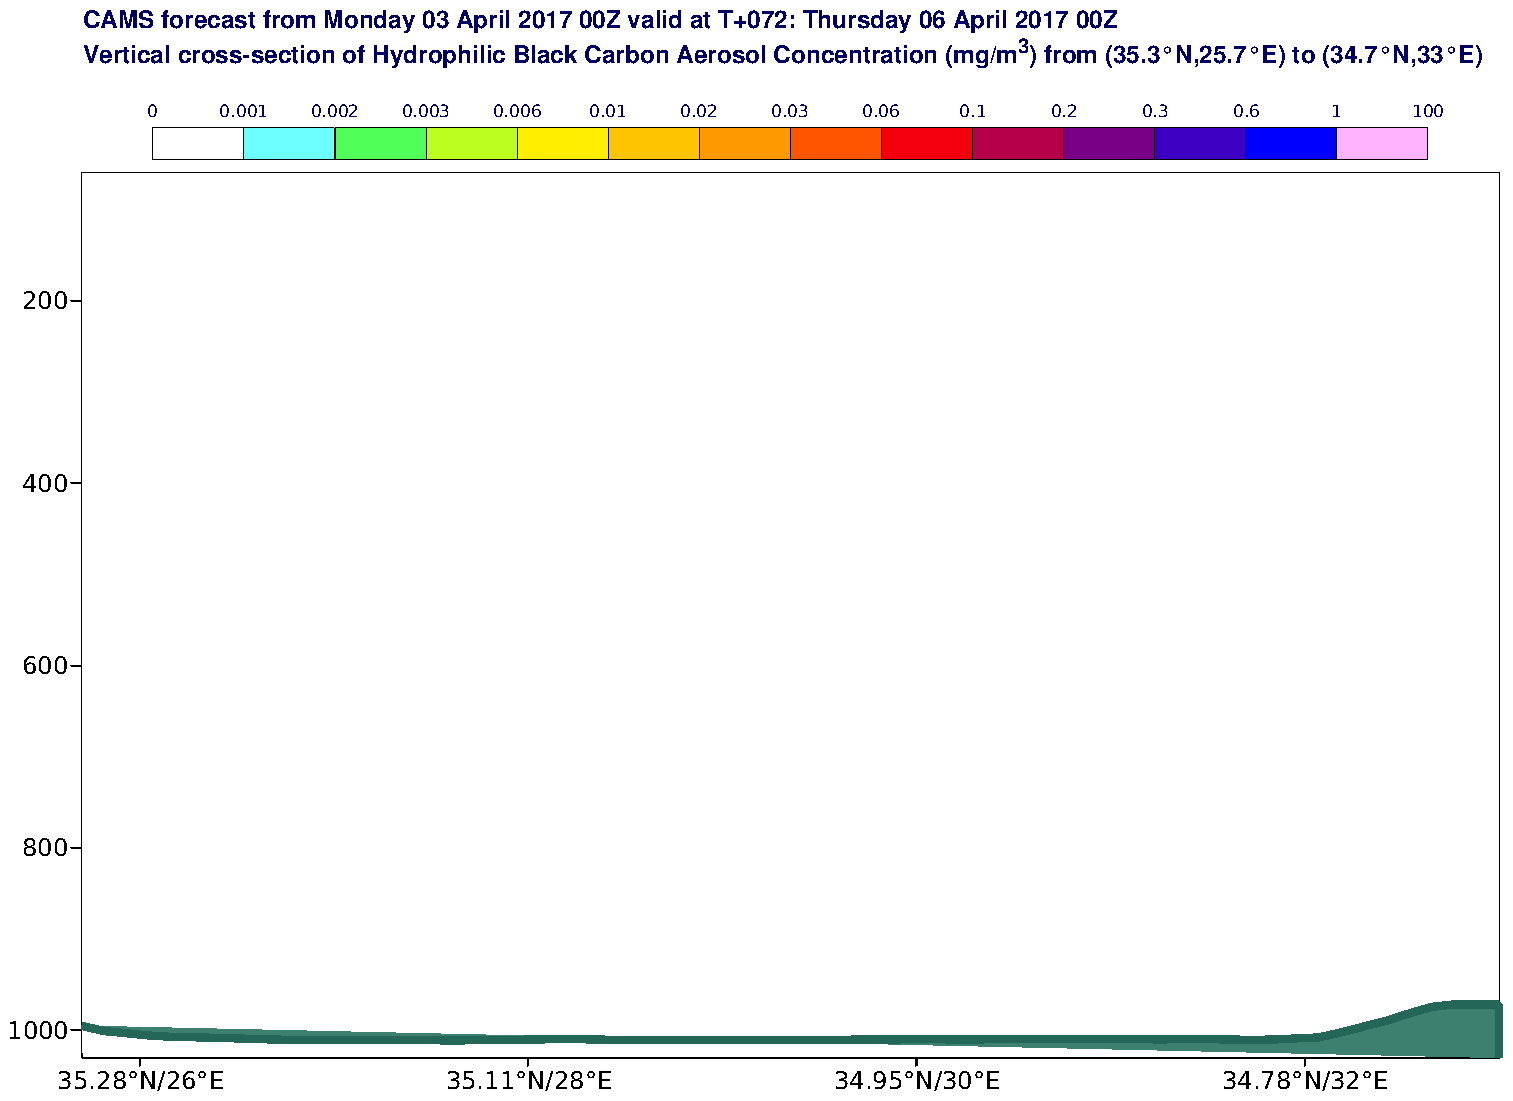 Vertical cross-section of Hydrophilic Black Carbon Aerosol Concentration (mg/m3) valid at T72 - 2017-04-06 00:00